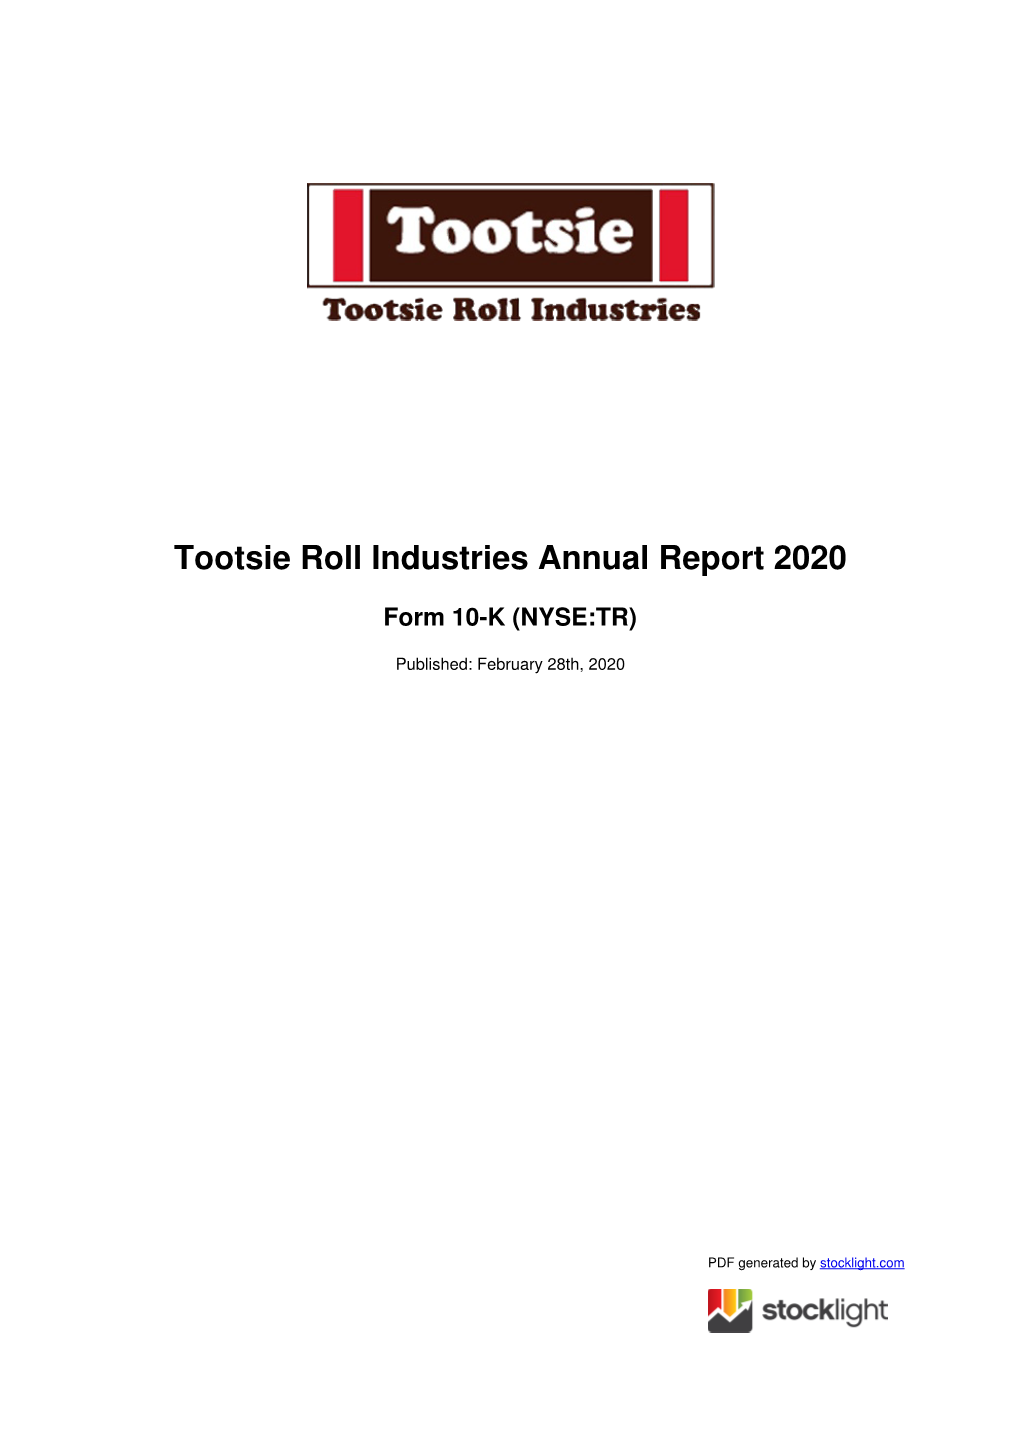 Tootsie Roll Industries Annual Report 2020